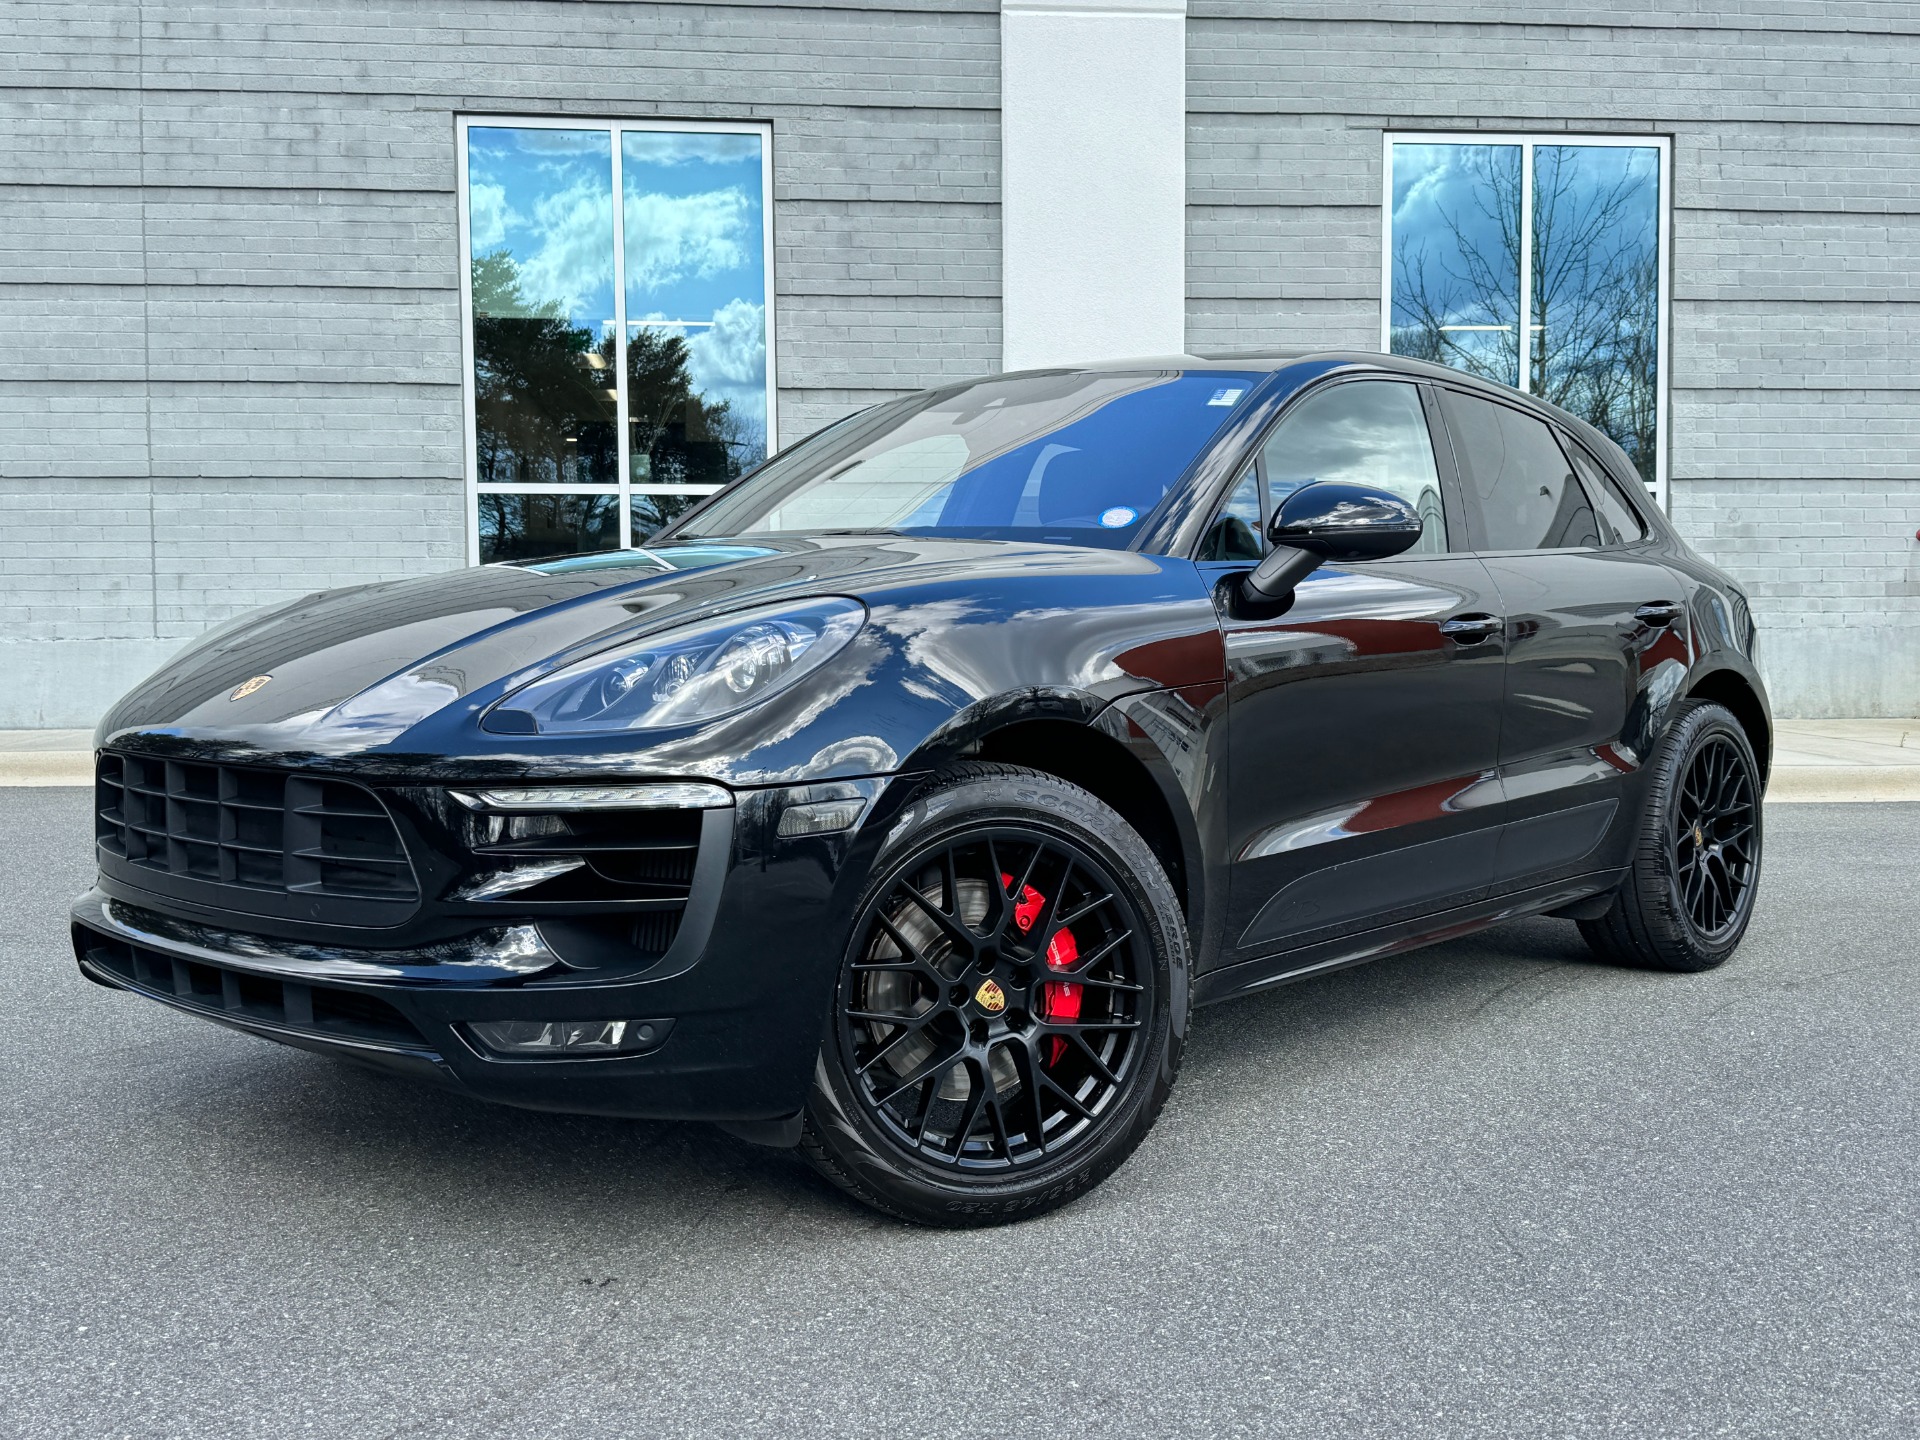 Used 2018 Porsche Macan GTS / 20IN WHEELS / PREMIUM PLUS / BOSE / SPORT SEATS for sale $53,995 at Formula Imports in Charlotte NC 28227 1